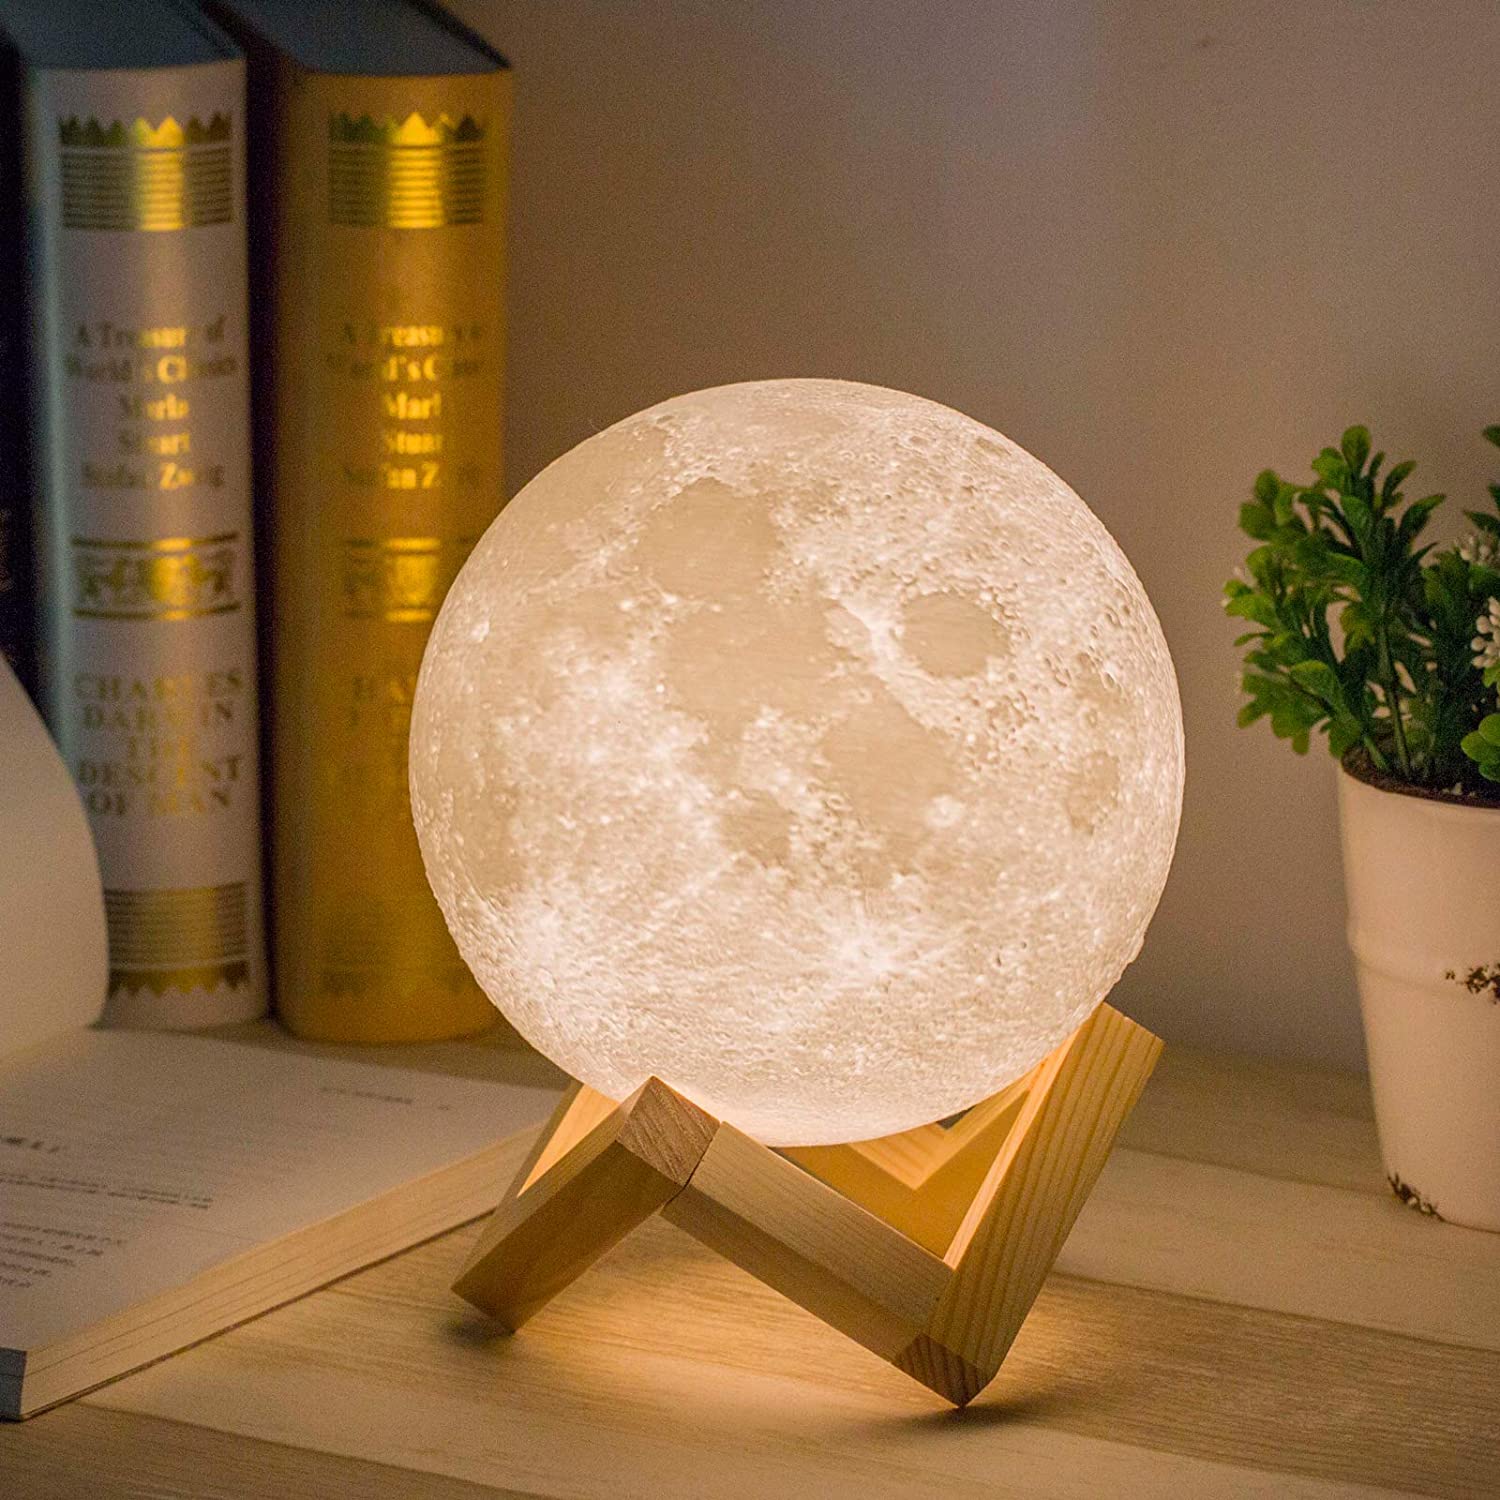 3D　Operated　Lazada　PH　Moon　Night　Lamp　With　Light　Stand　Battery　Print